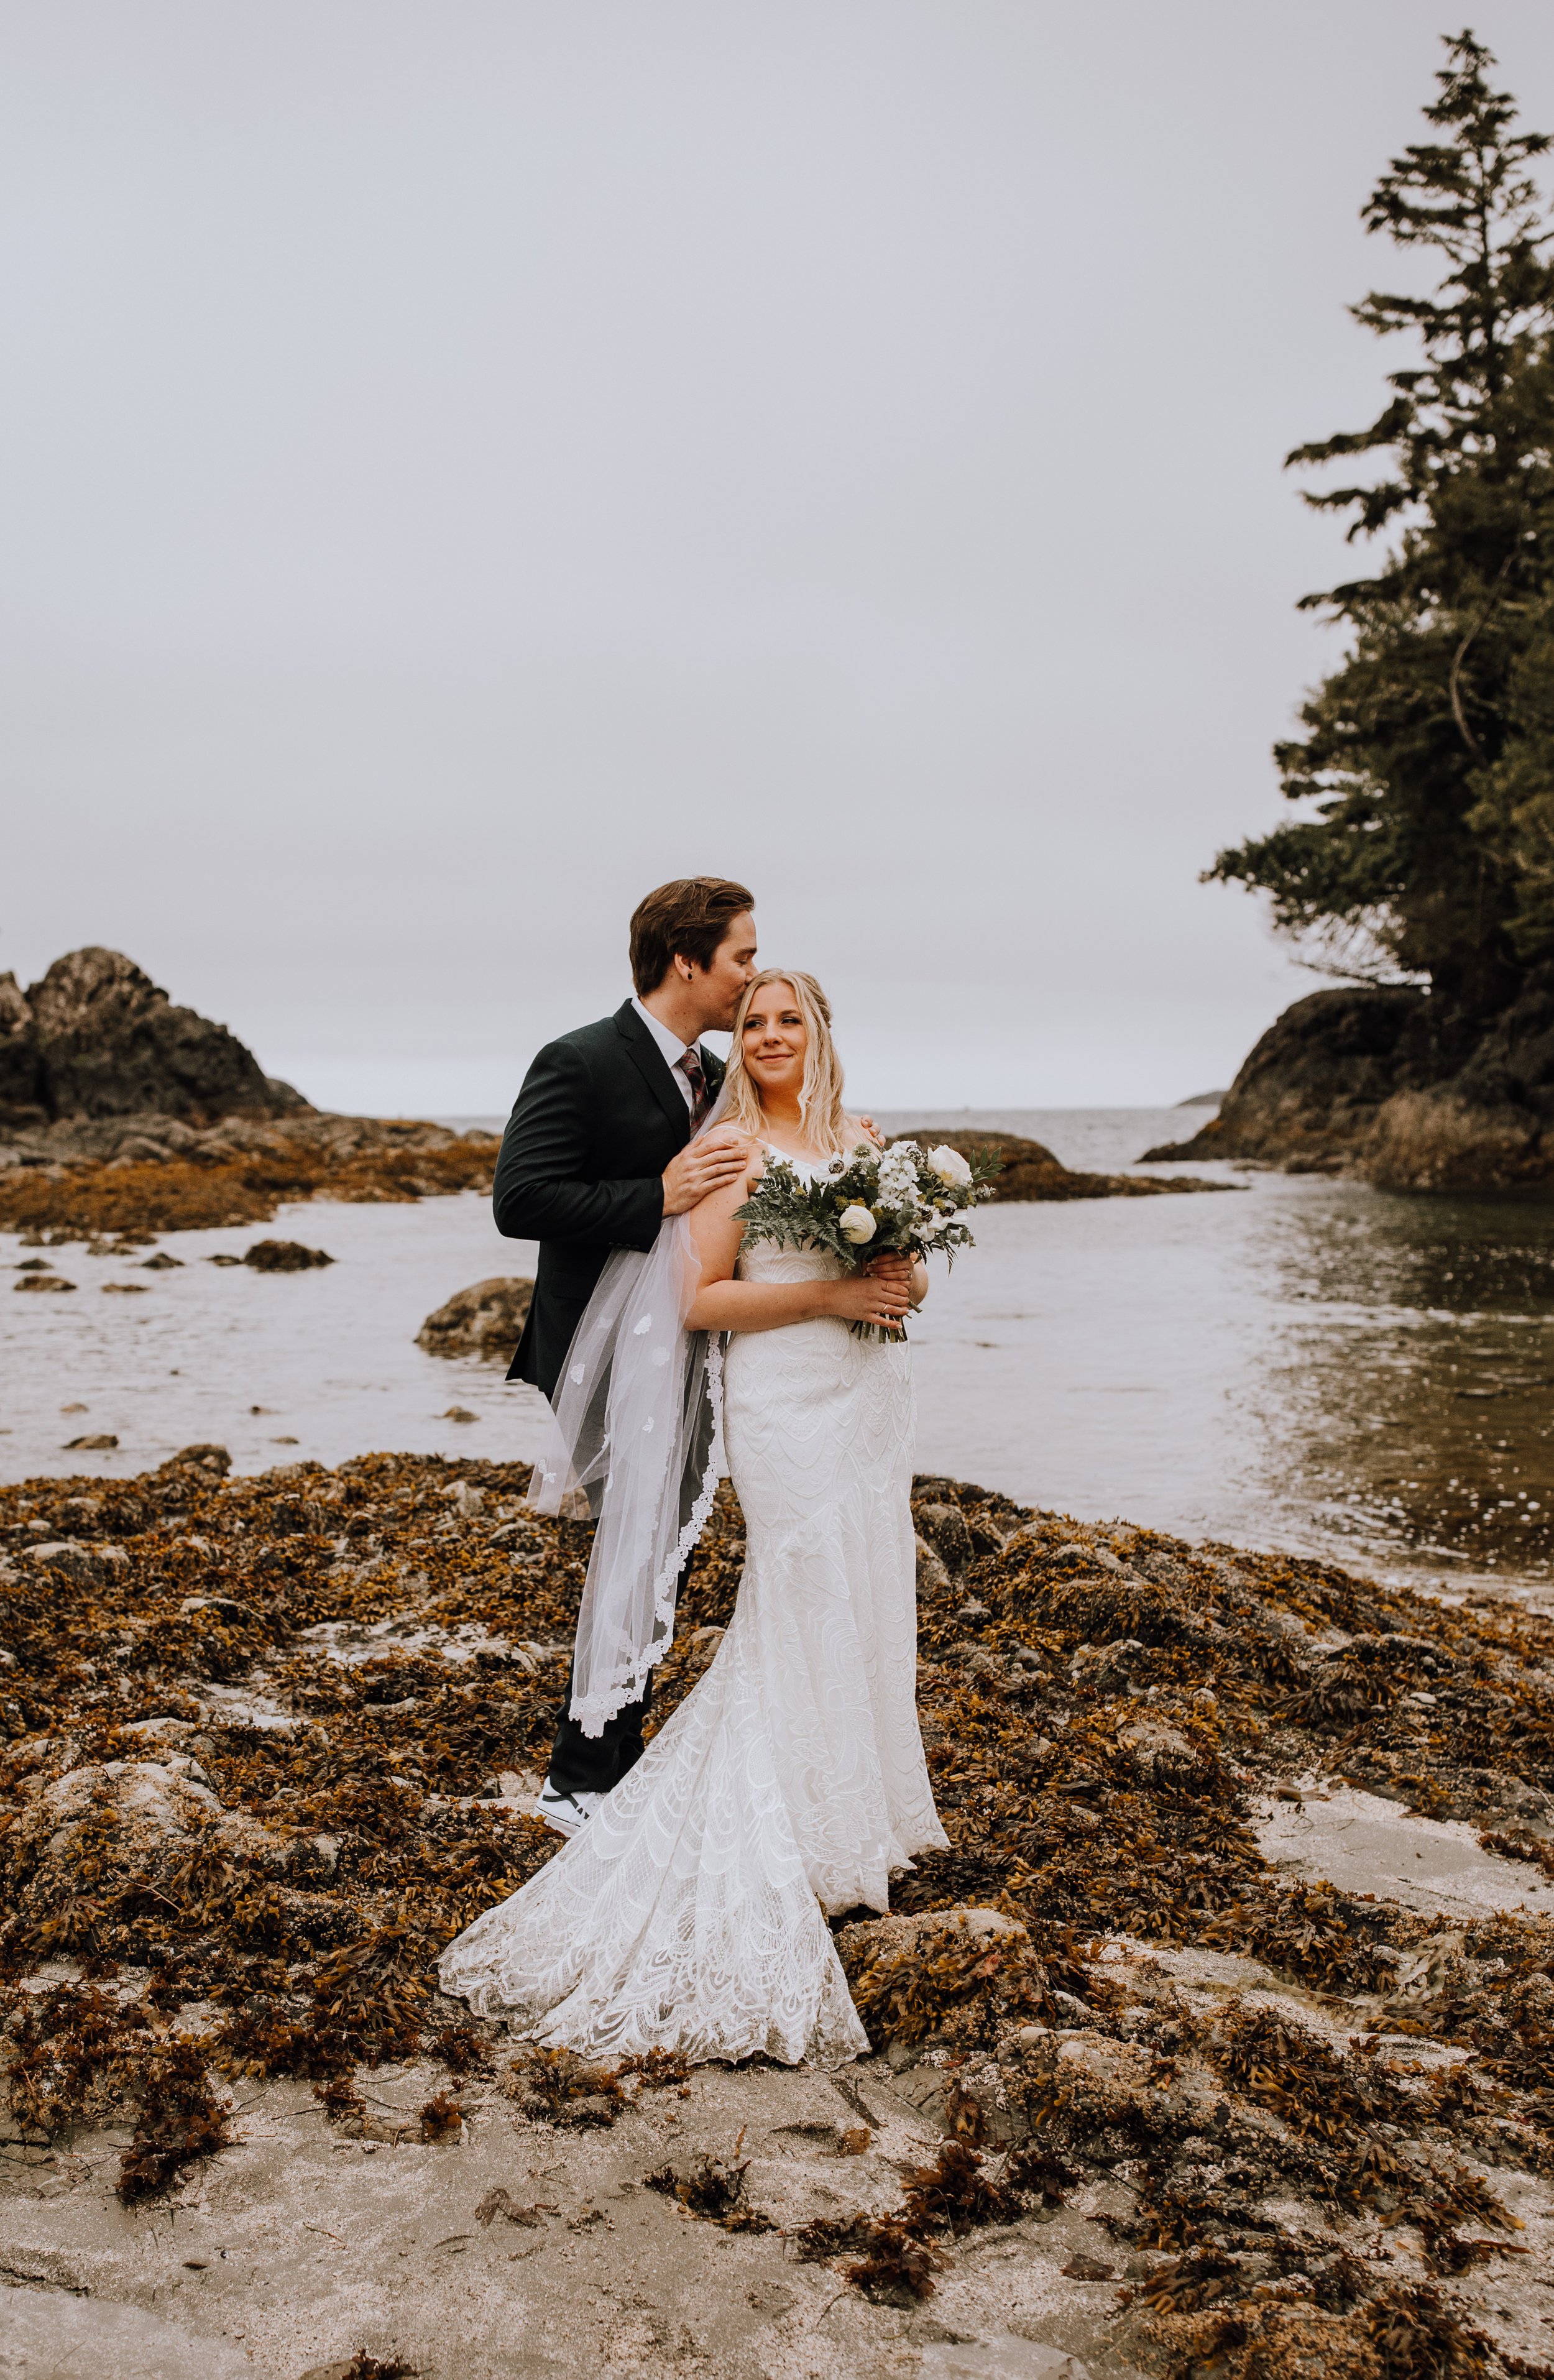 Brooke and Devin Wedding - Tin Wis Best Western Tofino Vancouver Island British Columbia - Elyse Anna Photography-4039.jpg